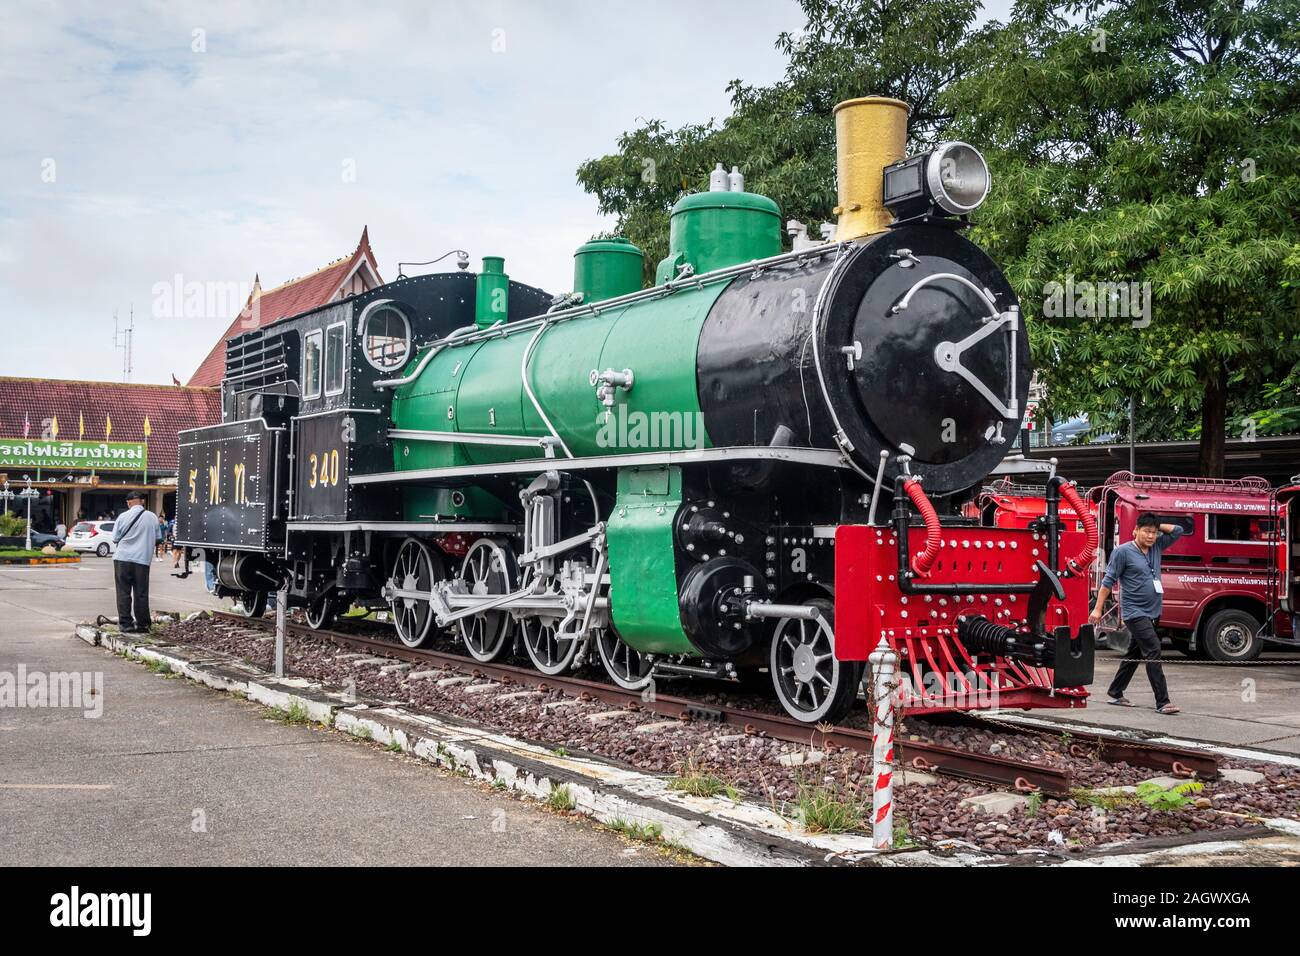 Preserved steam locomotive on static display outside railway station at Chiang Mai, Thailand Stock Photo